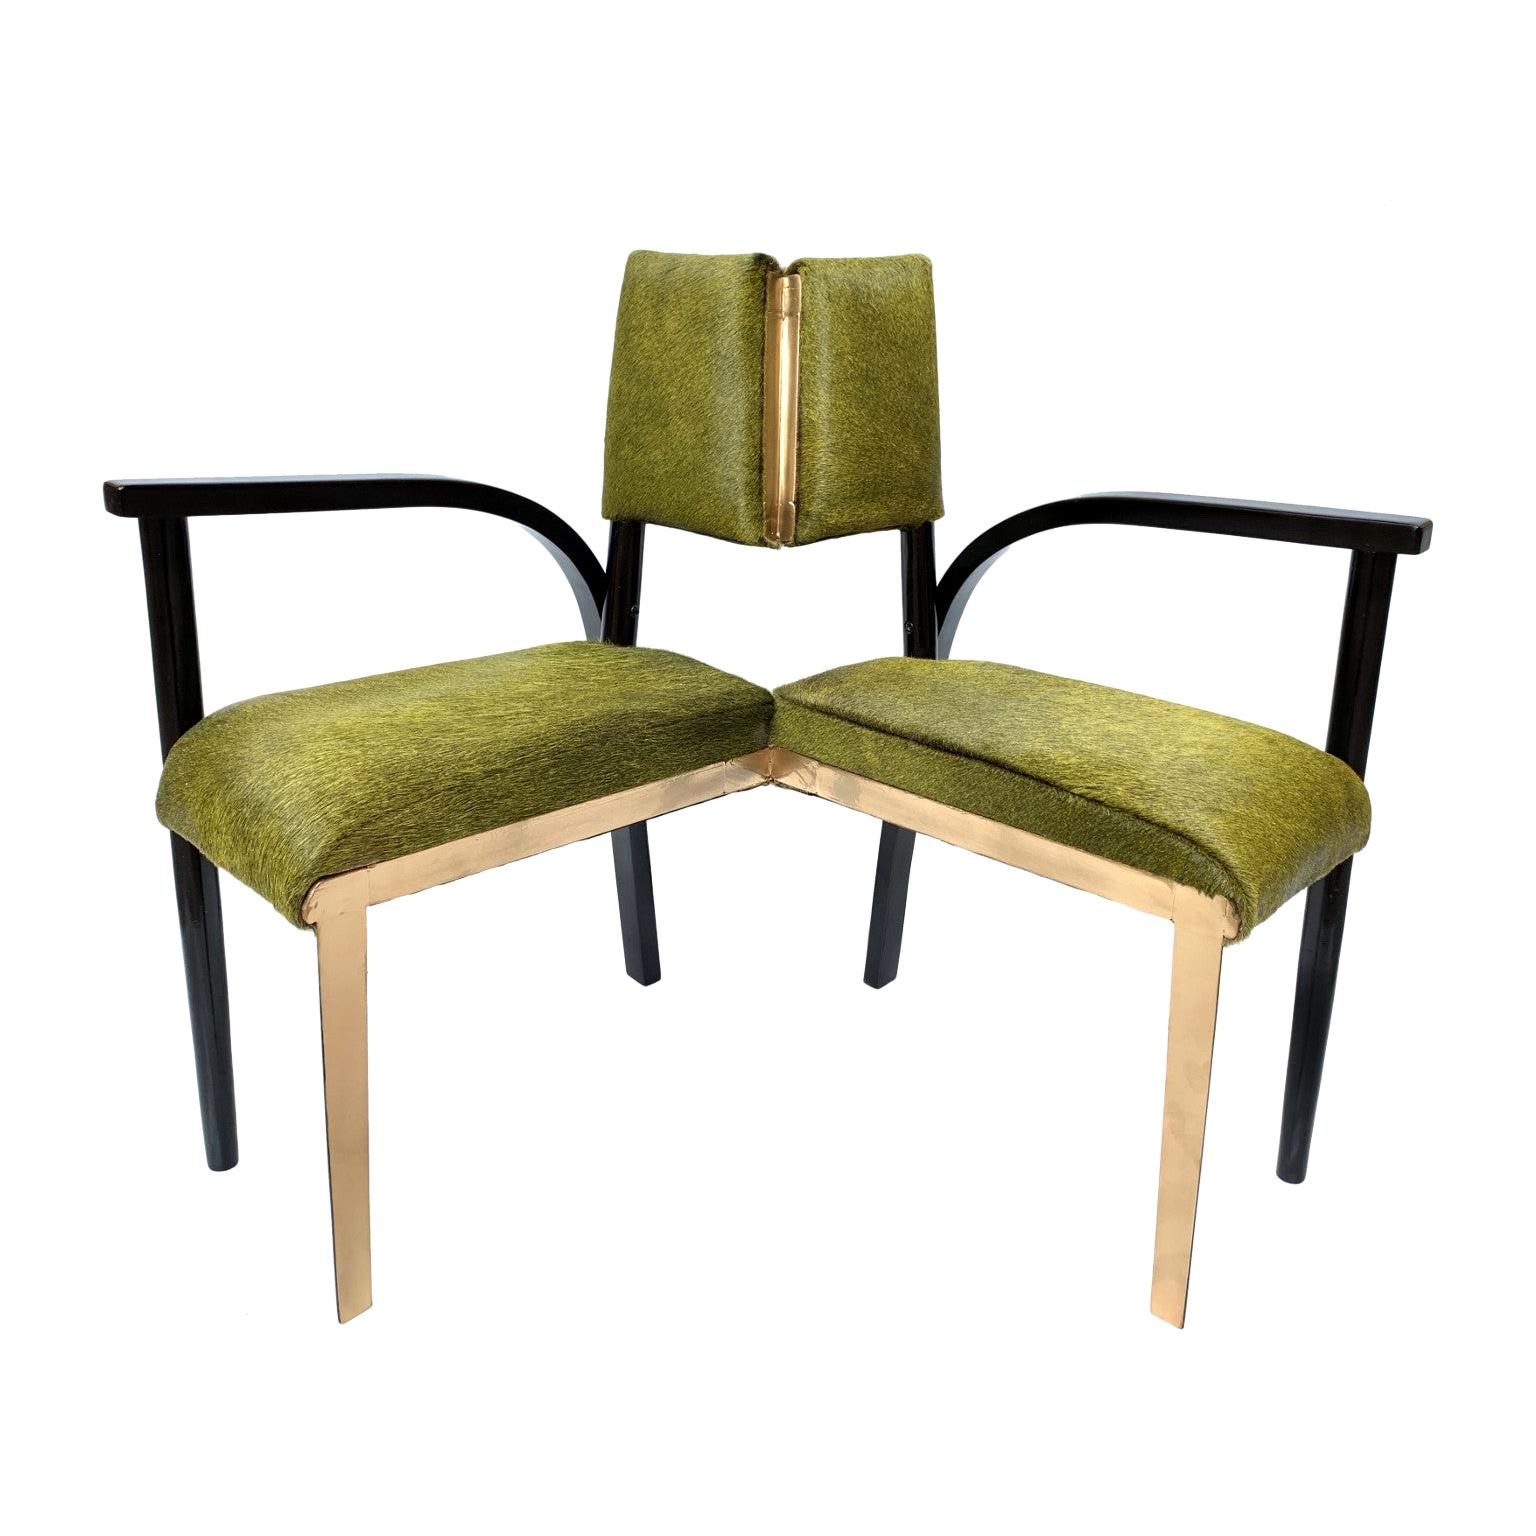 21st Century Contemporary Green Hairy Leather Corner Chair by Giampiero Romanò